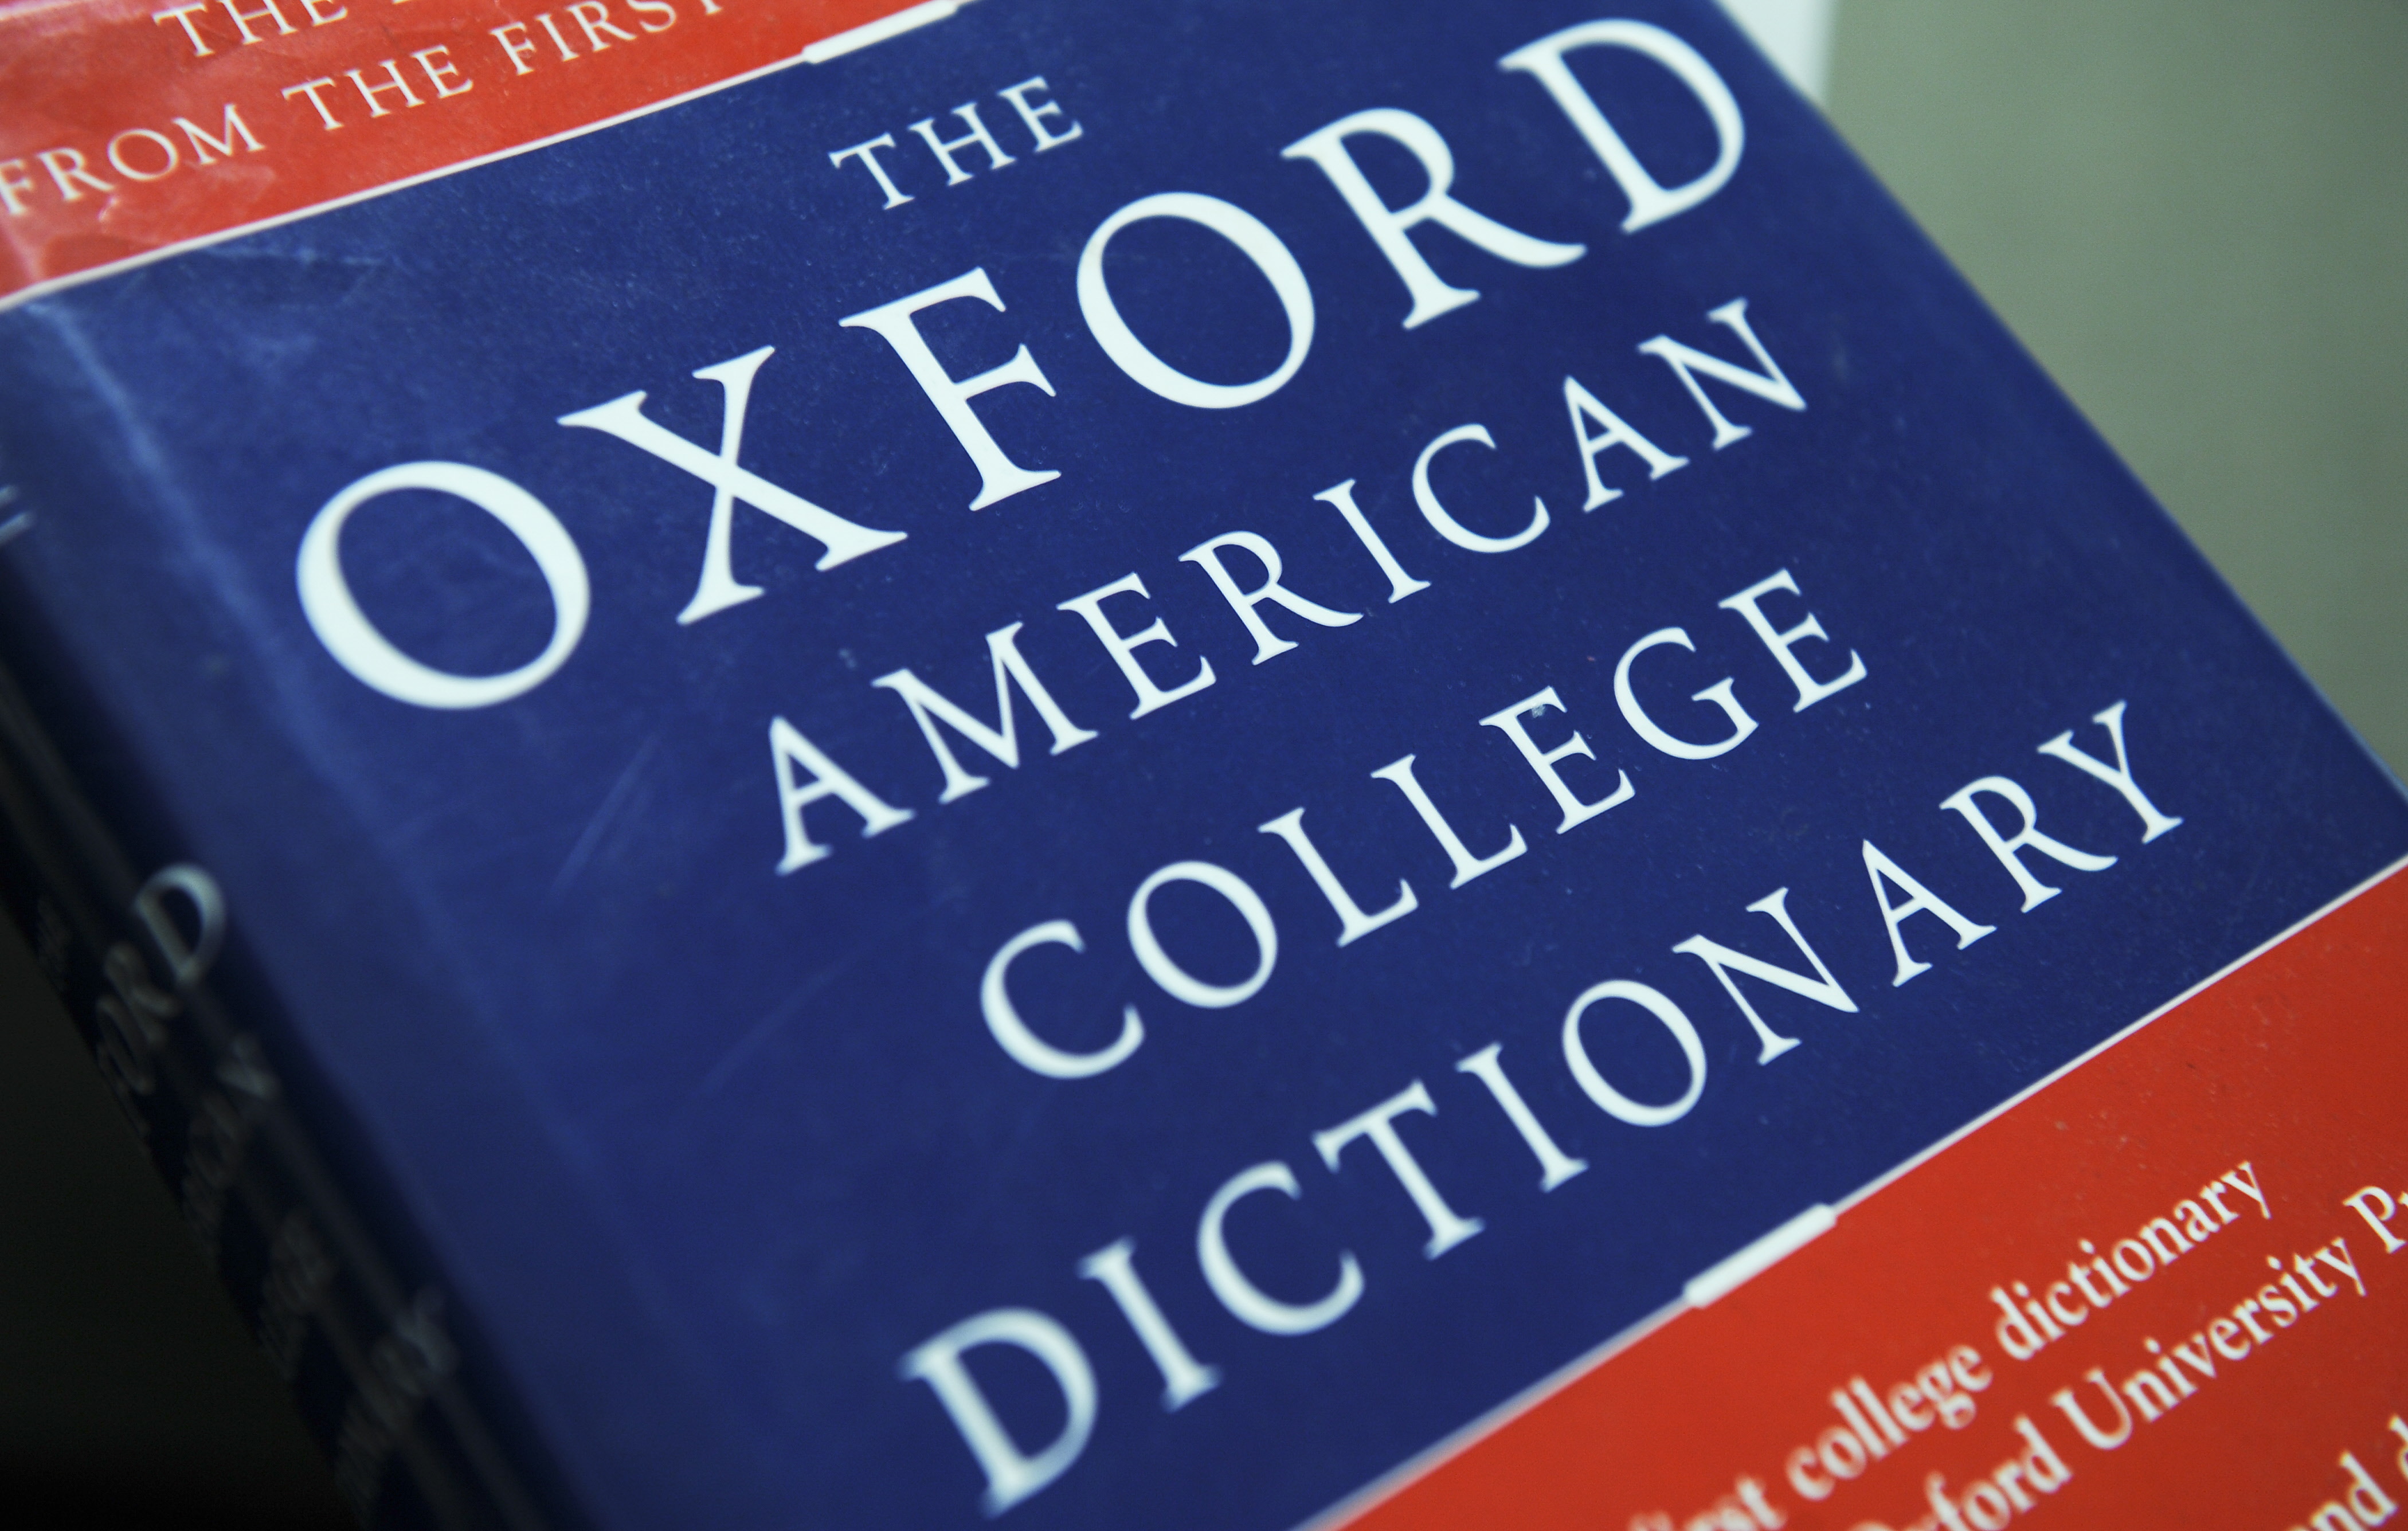 The Oxford American College dictionary. (NICHOLAS KAMM&mdash;AFP/Getty Images)